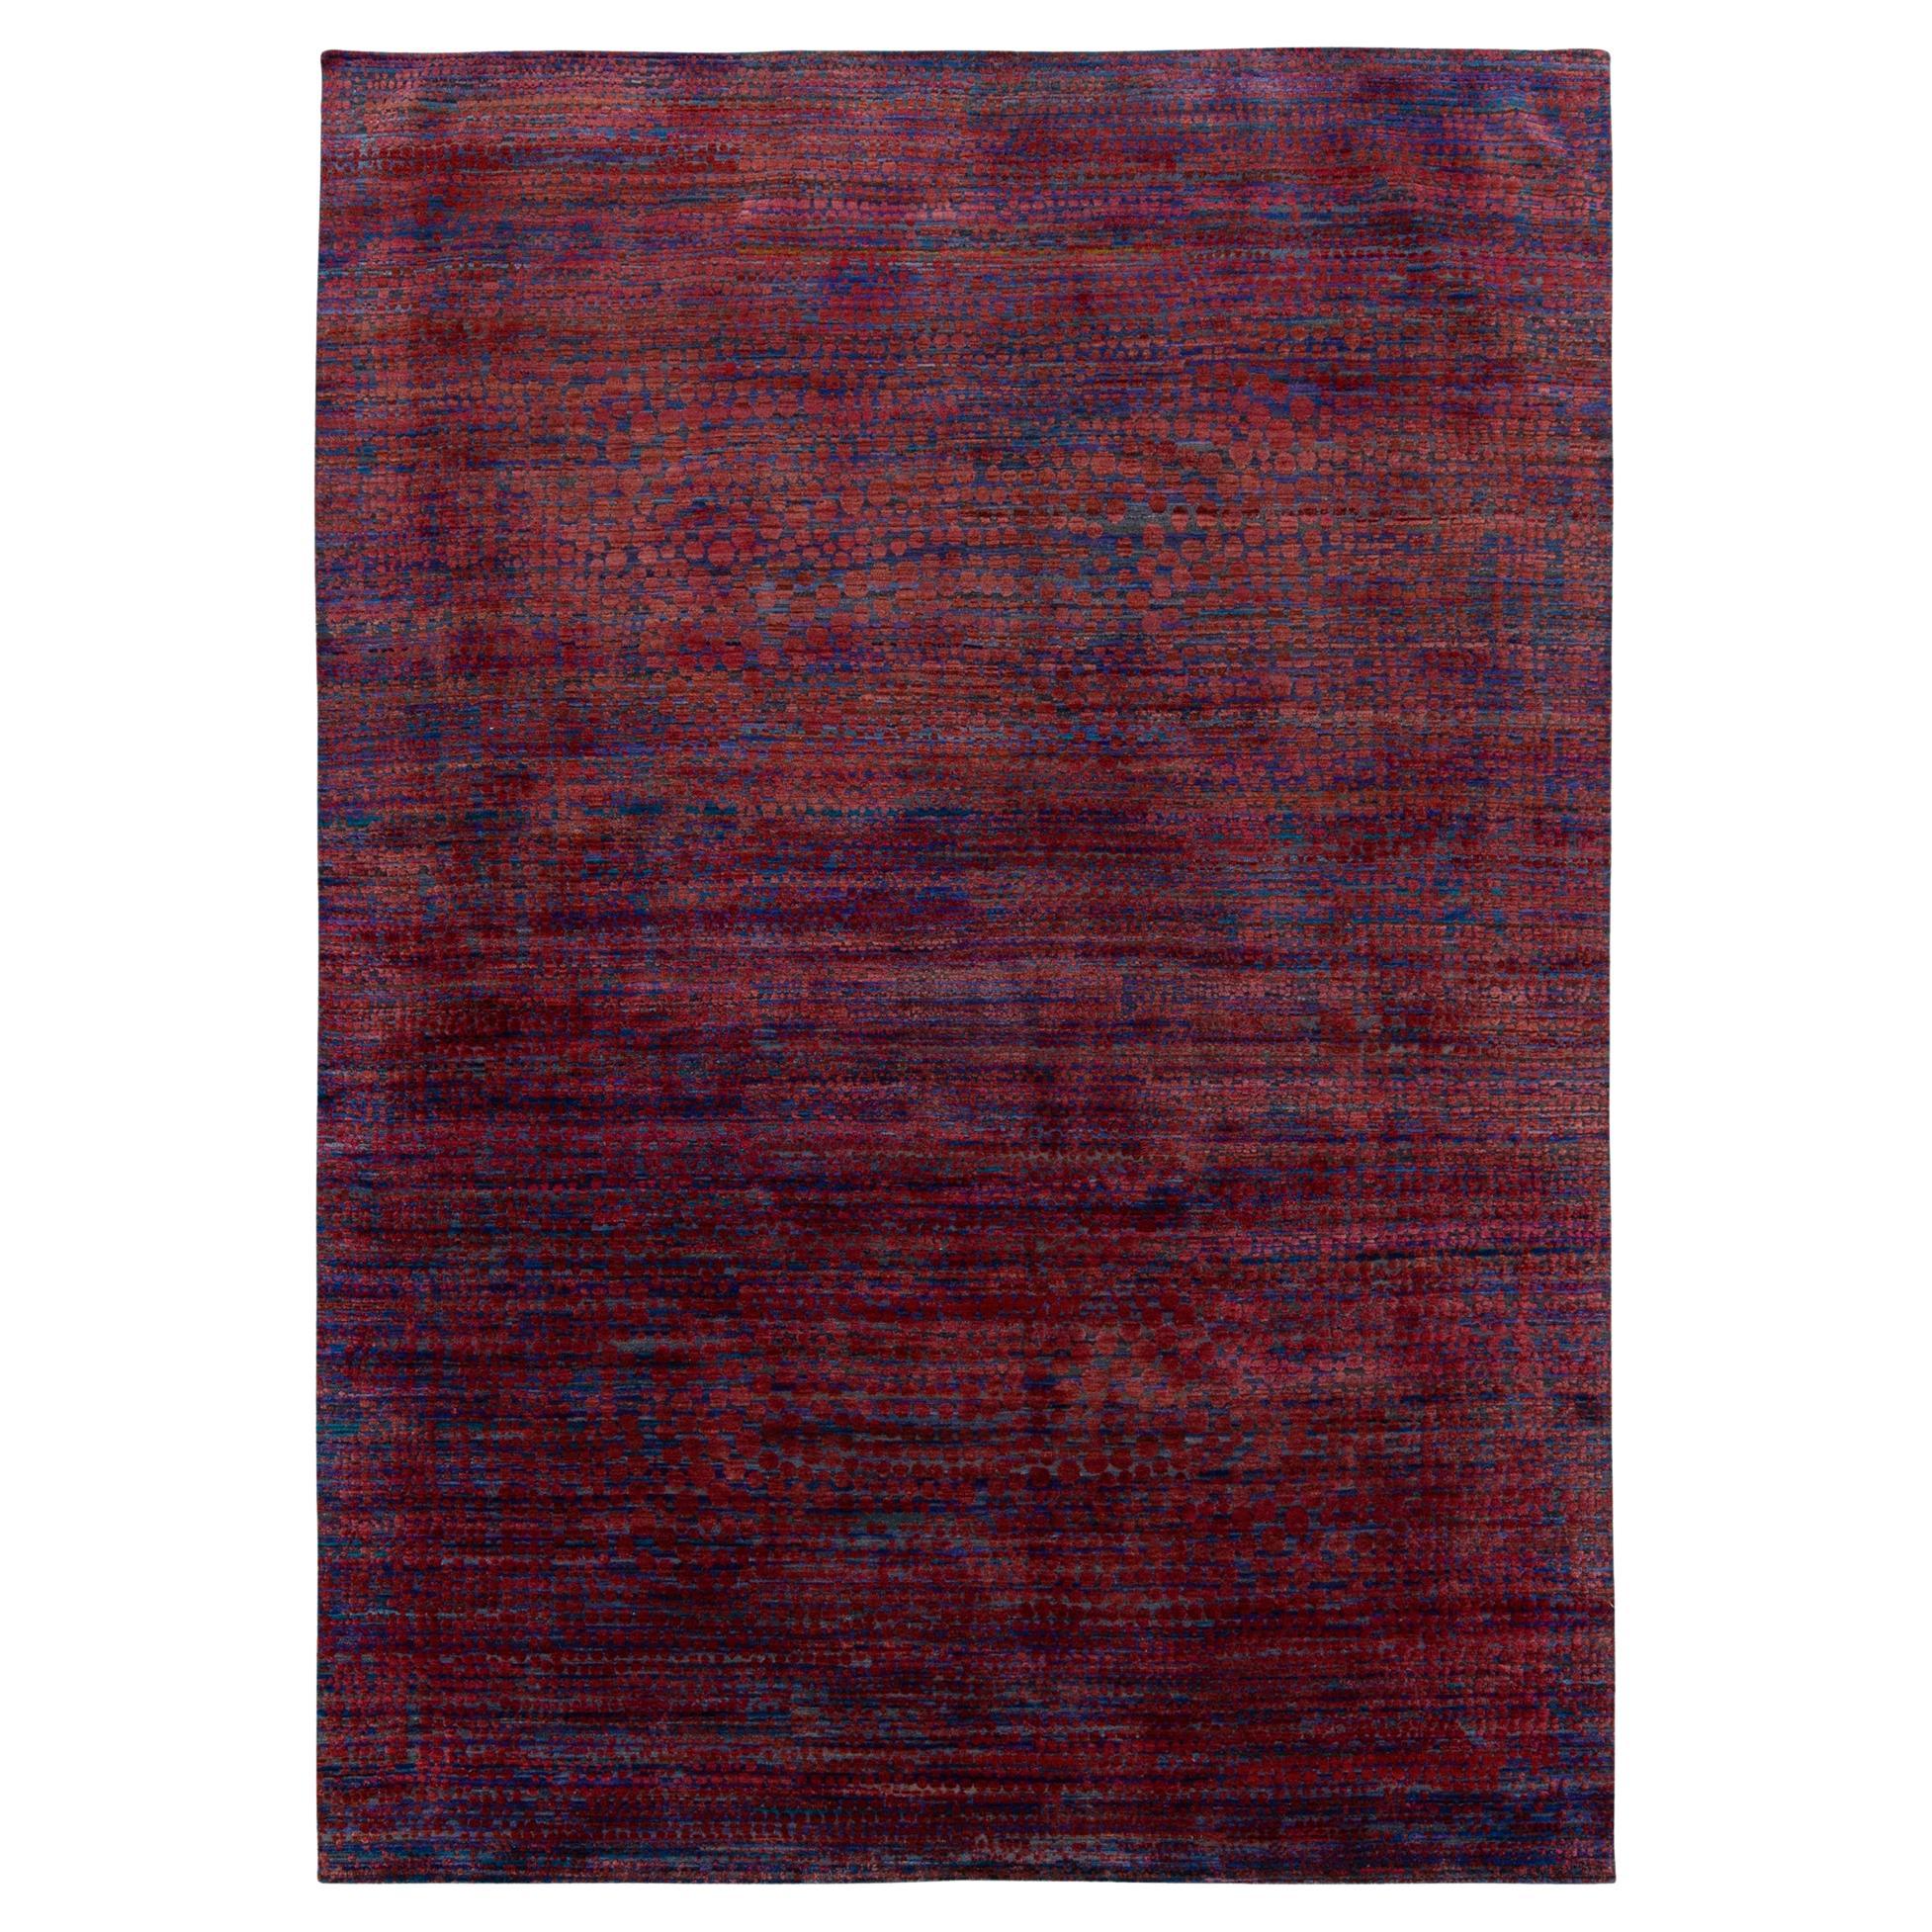 Rug & Kilim’s Modern Abstract Rug in Red & Blue Dots Pattern